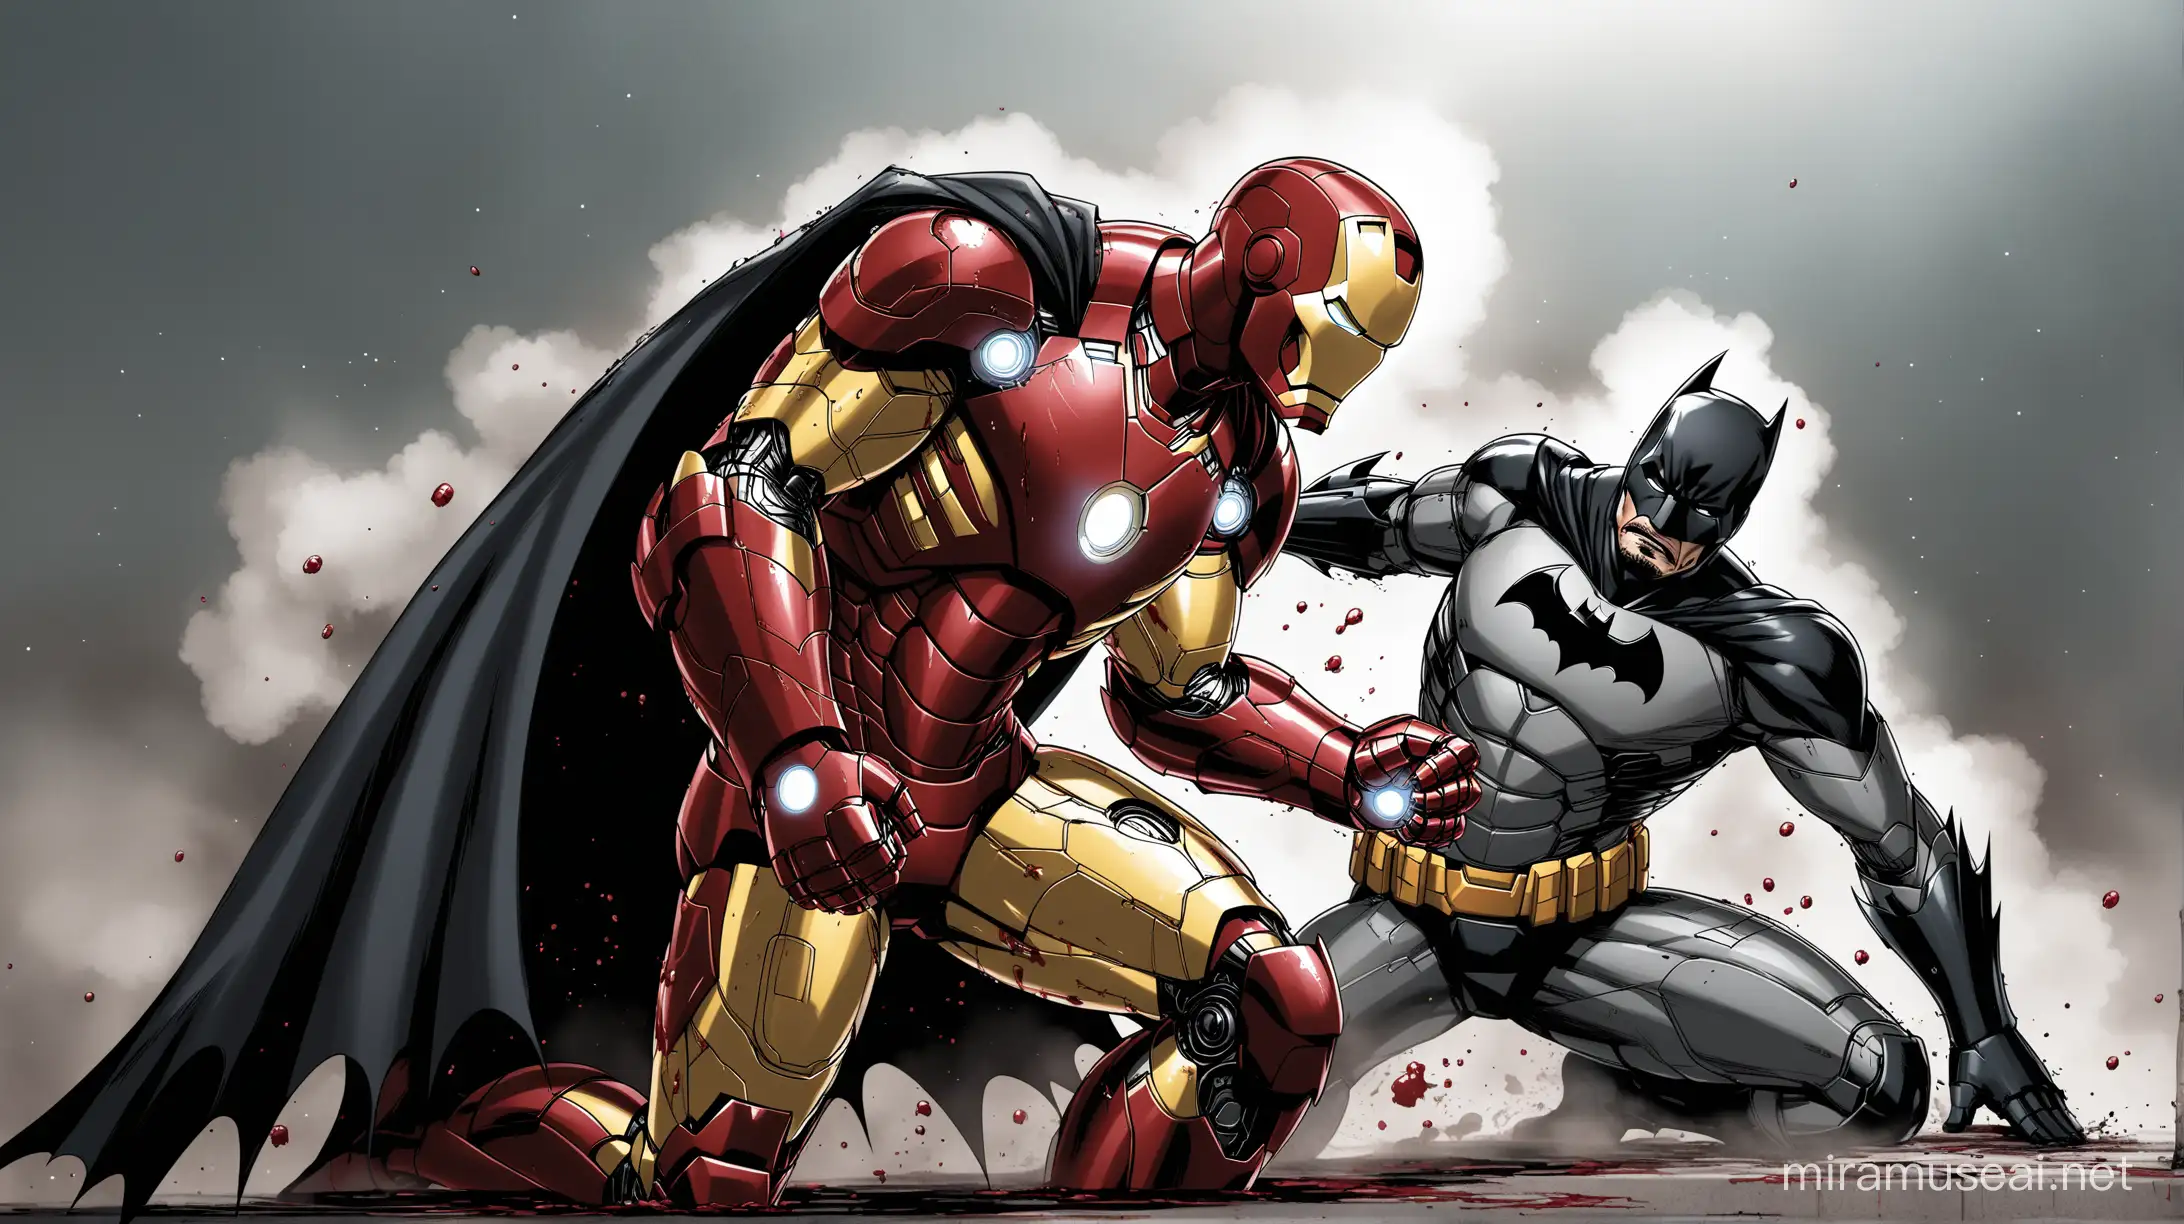 Iron man and batman fighting. both are very tired and bleeding.